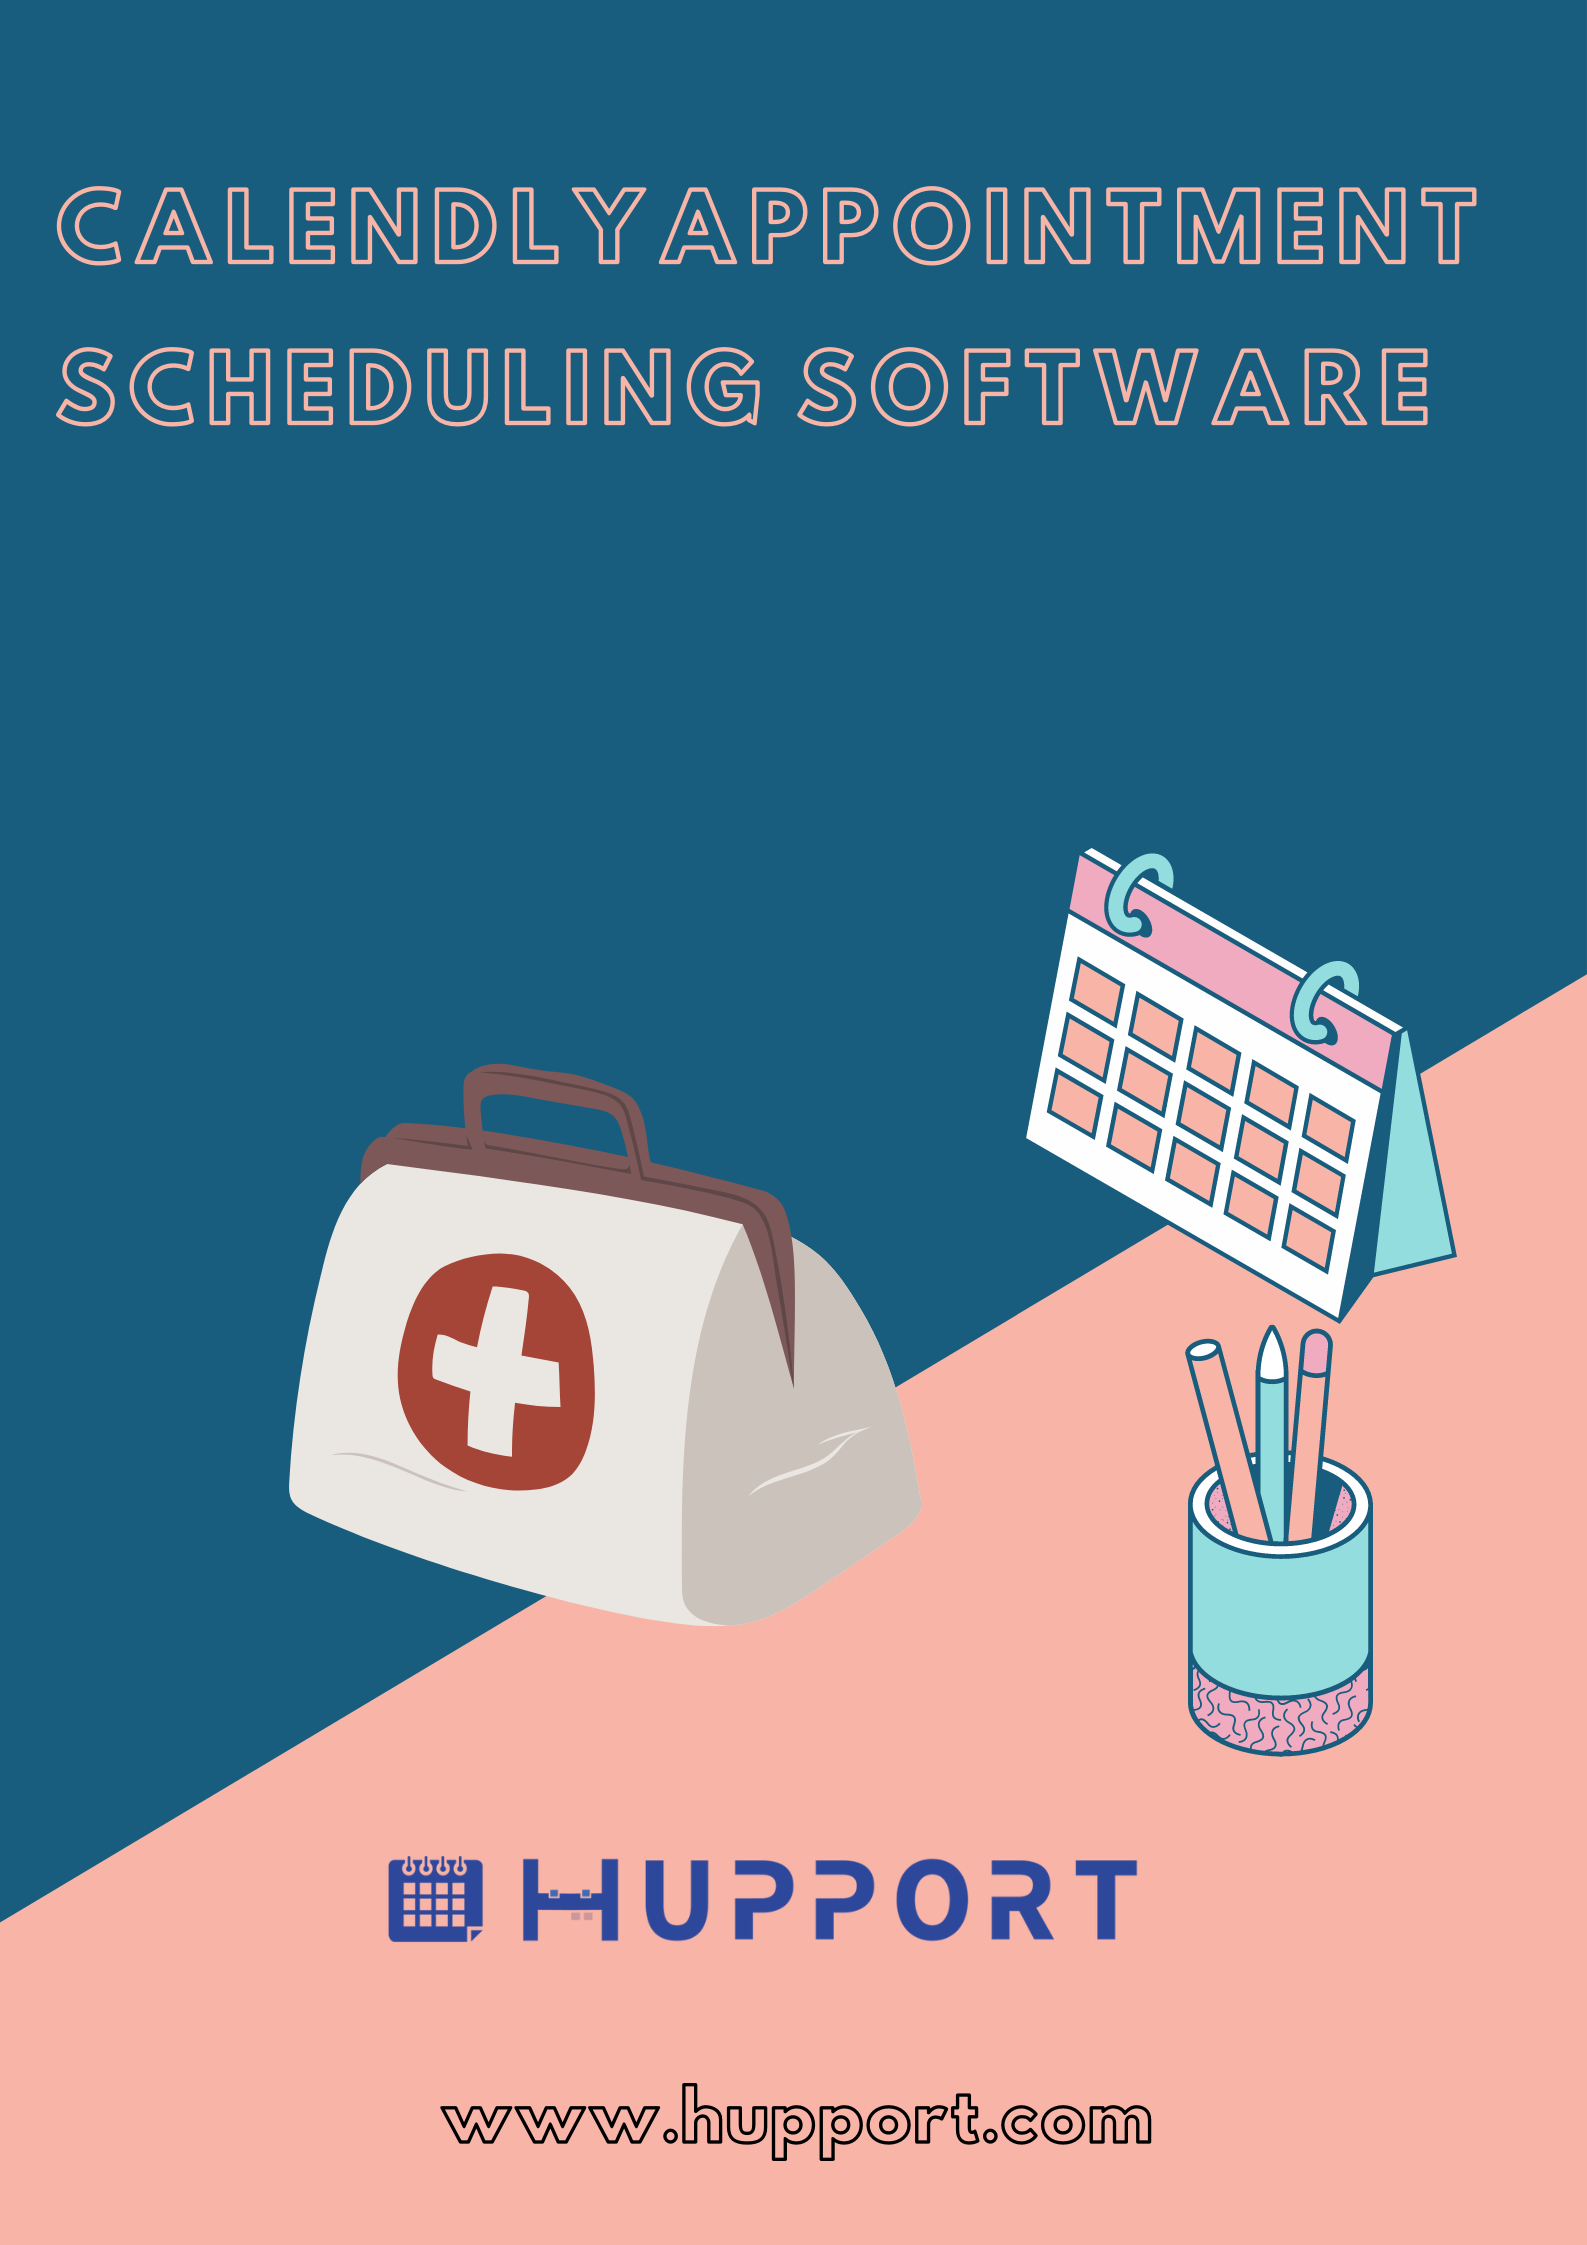 Calendly appointment scheduling software